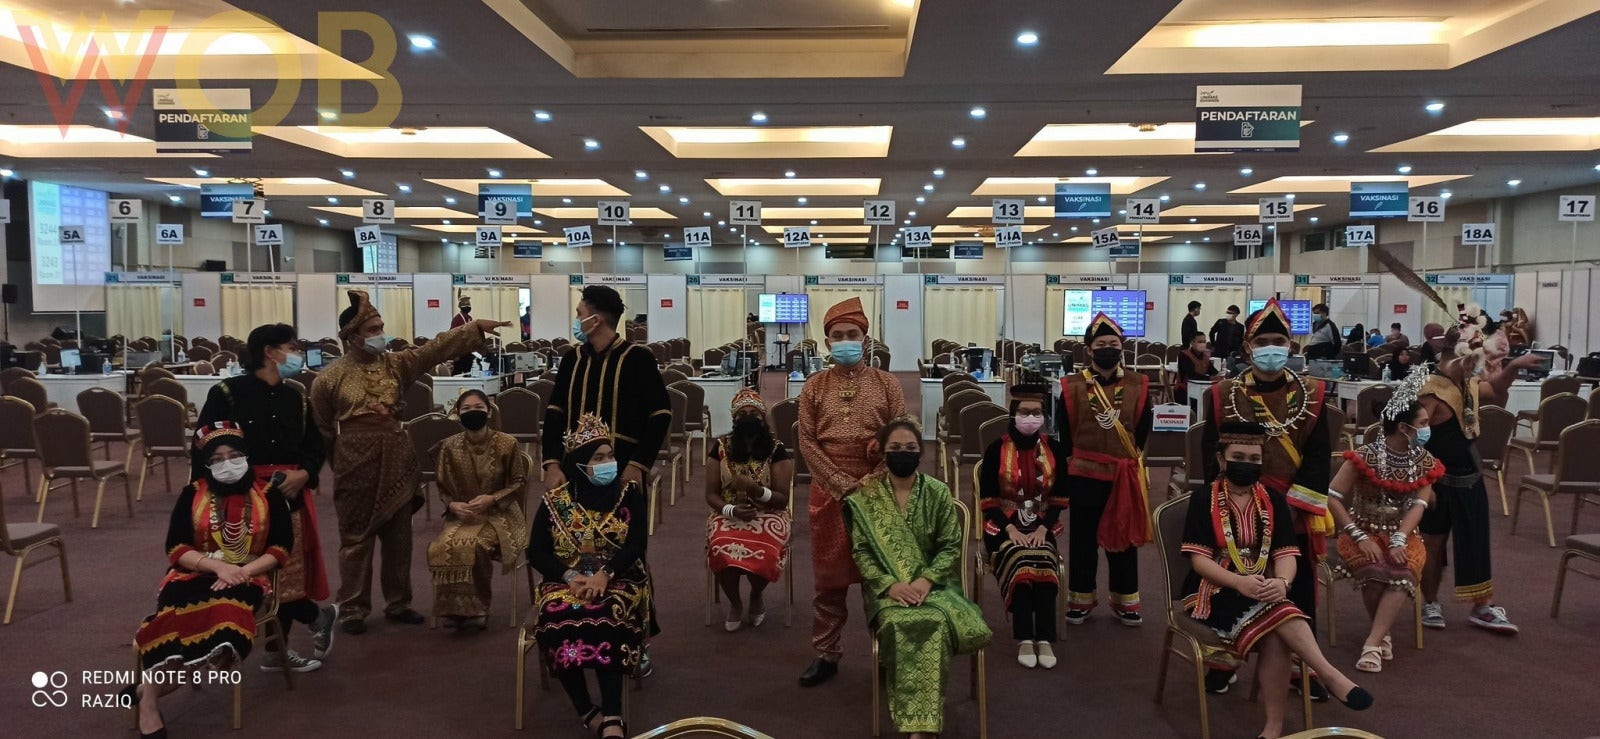 PPV UNIMAS student volunteers in traditional clothes